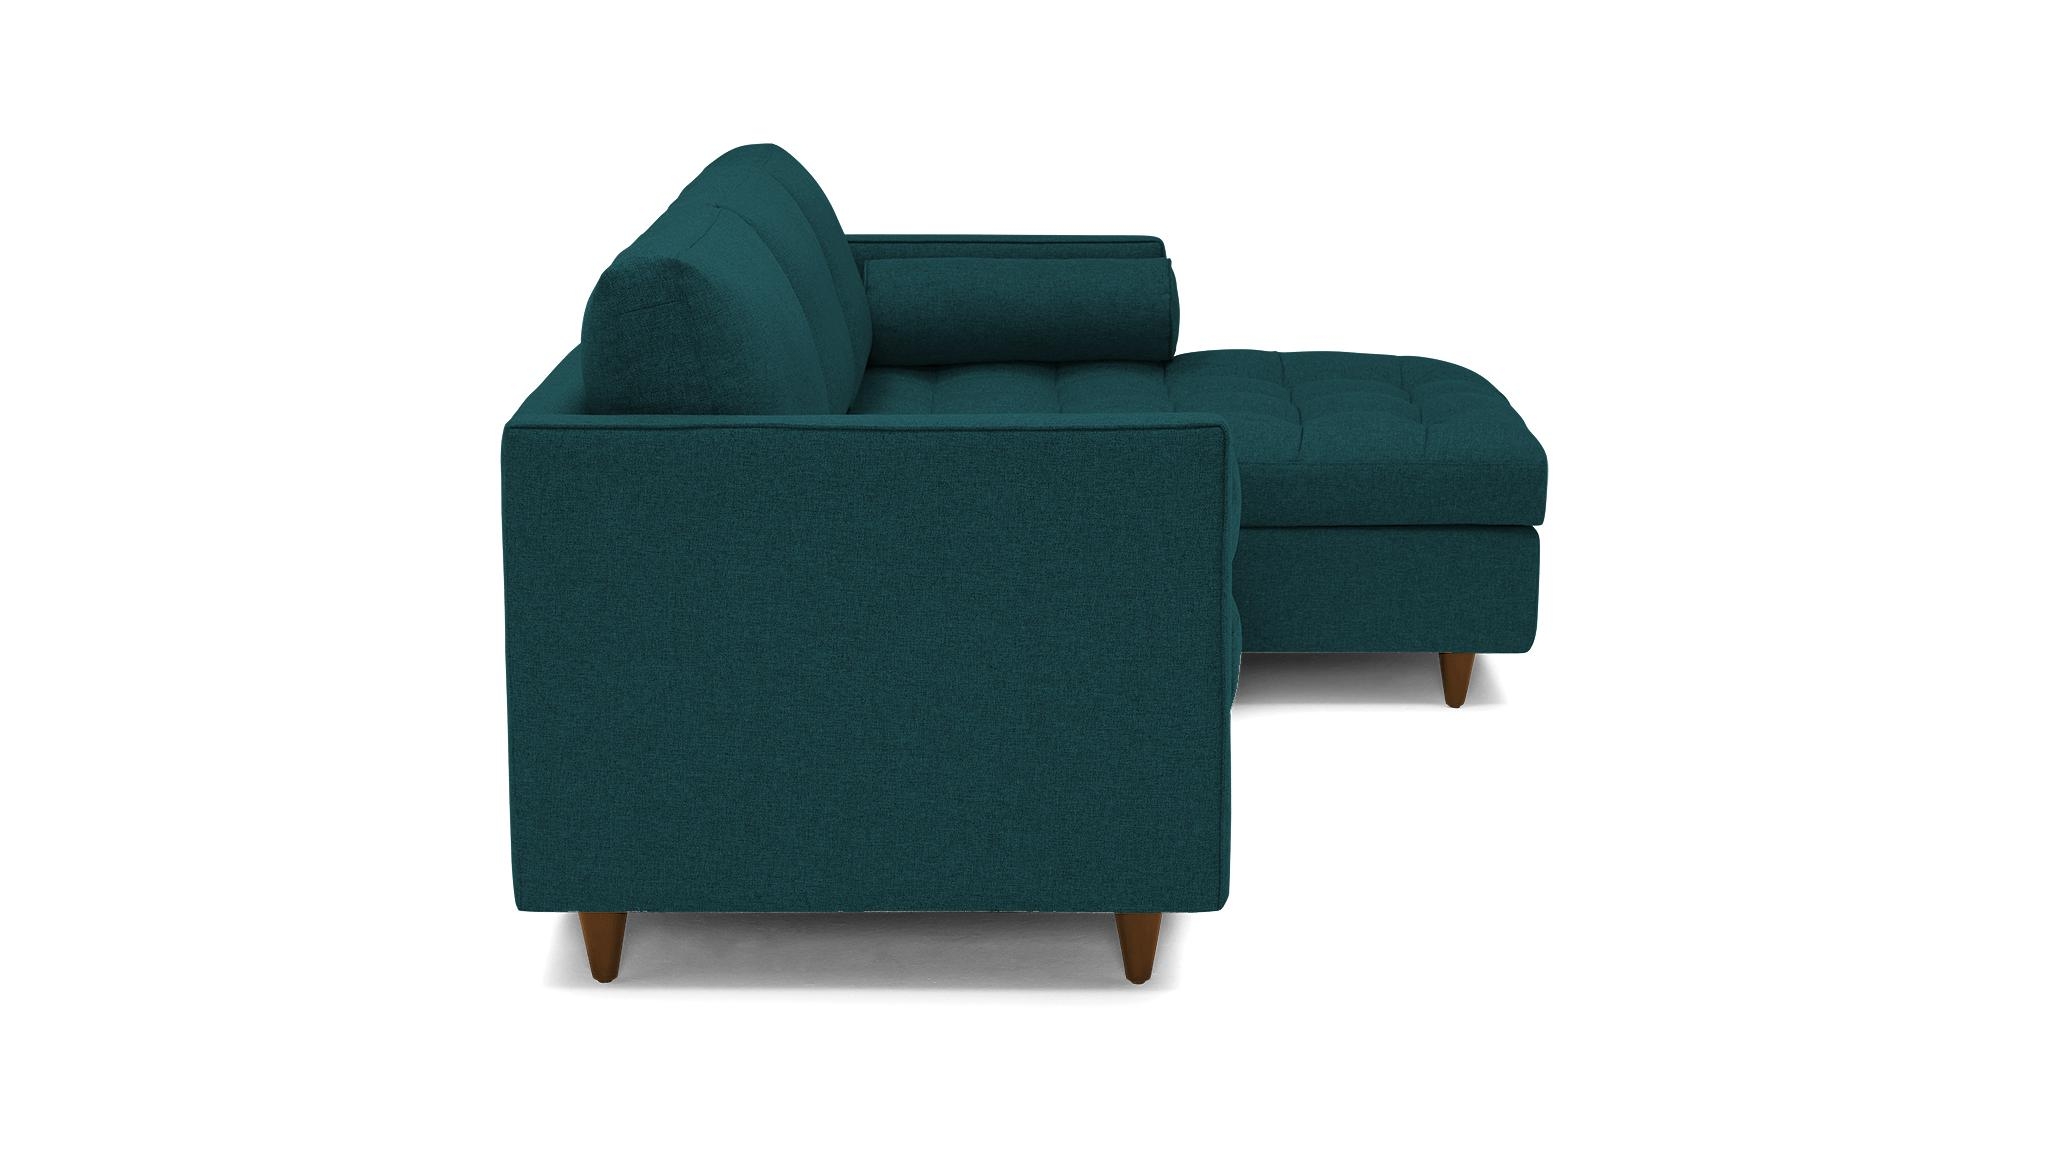 Blue Briar Mid Century Modern Sectional with Storage - Royale Peacock - Mocha - Left - Image 3